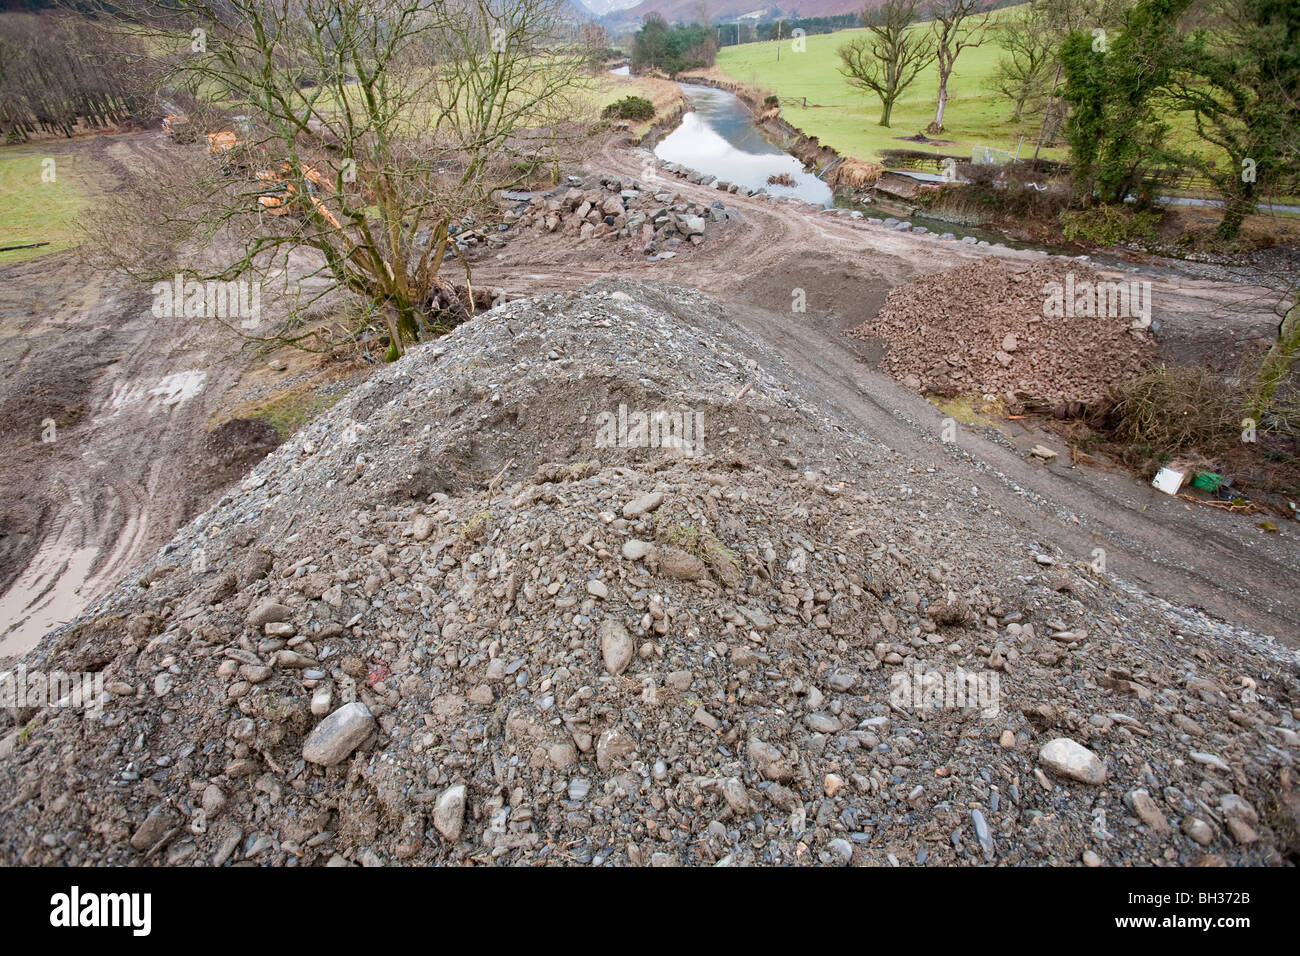 Debris caused by the devastating November 2009 floods in Cockermouth when the river Derwent reached unprecedented levels. Stock Photo